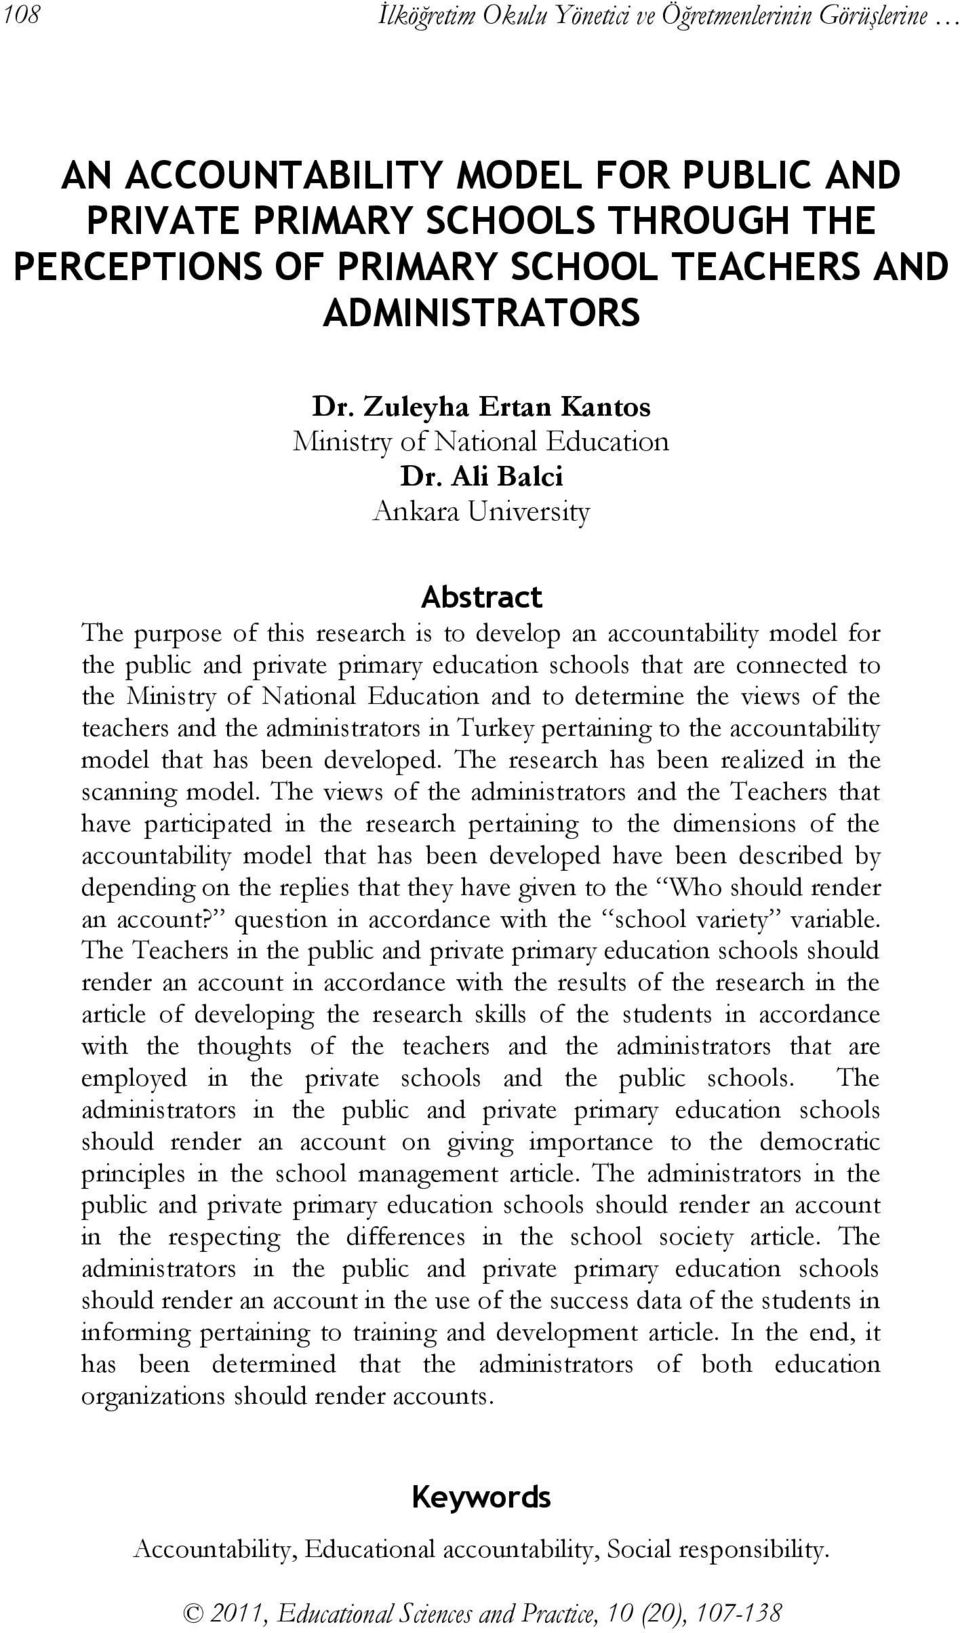 Ali Balci Ankara University Abstract The purpose of this research is to develop an accountability model for the public and private primary education schools that are connected to the Ministry of